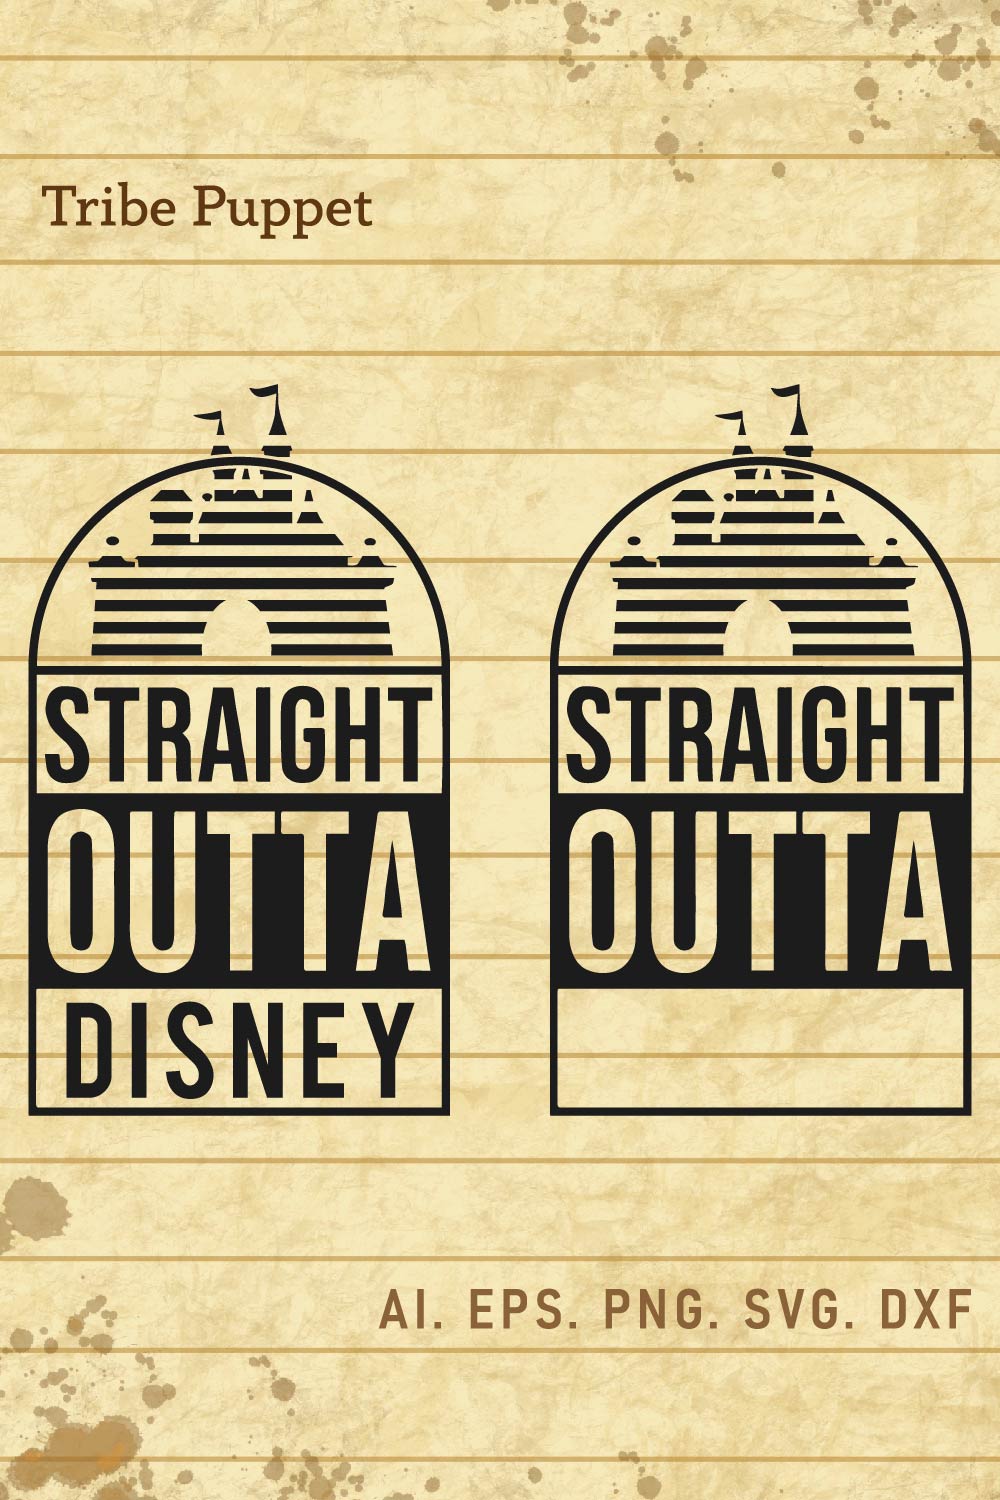 Straight outta disney pinterest preview image.